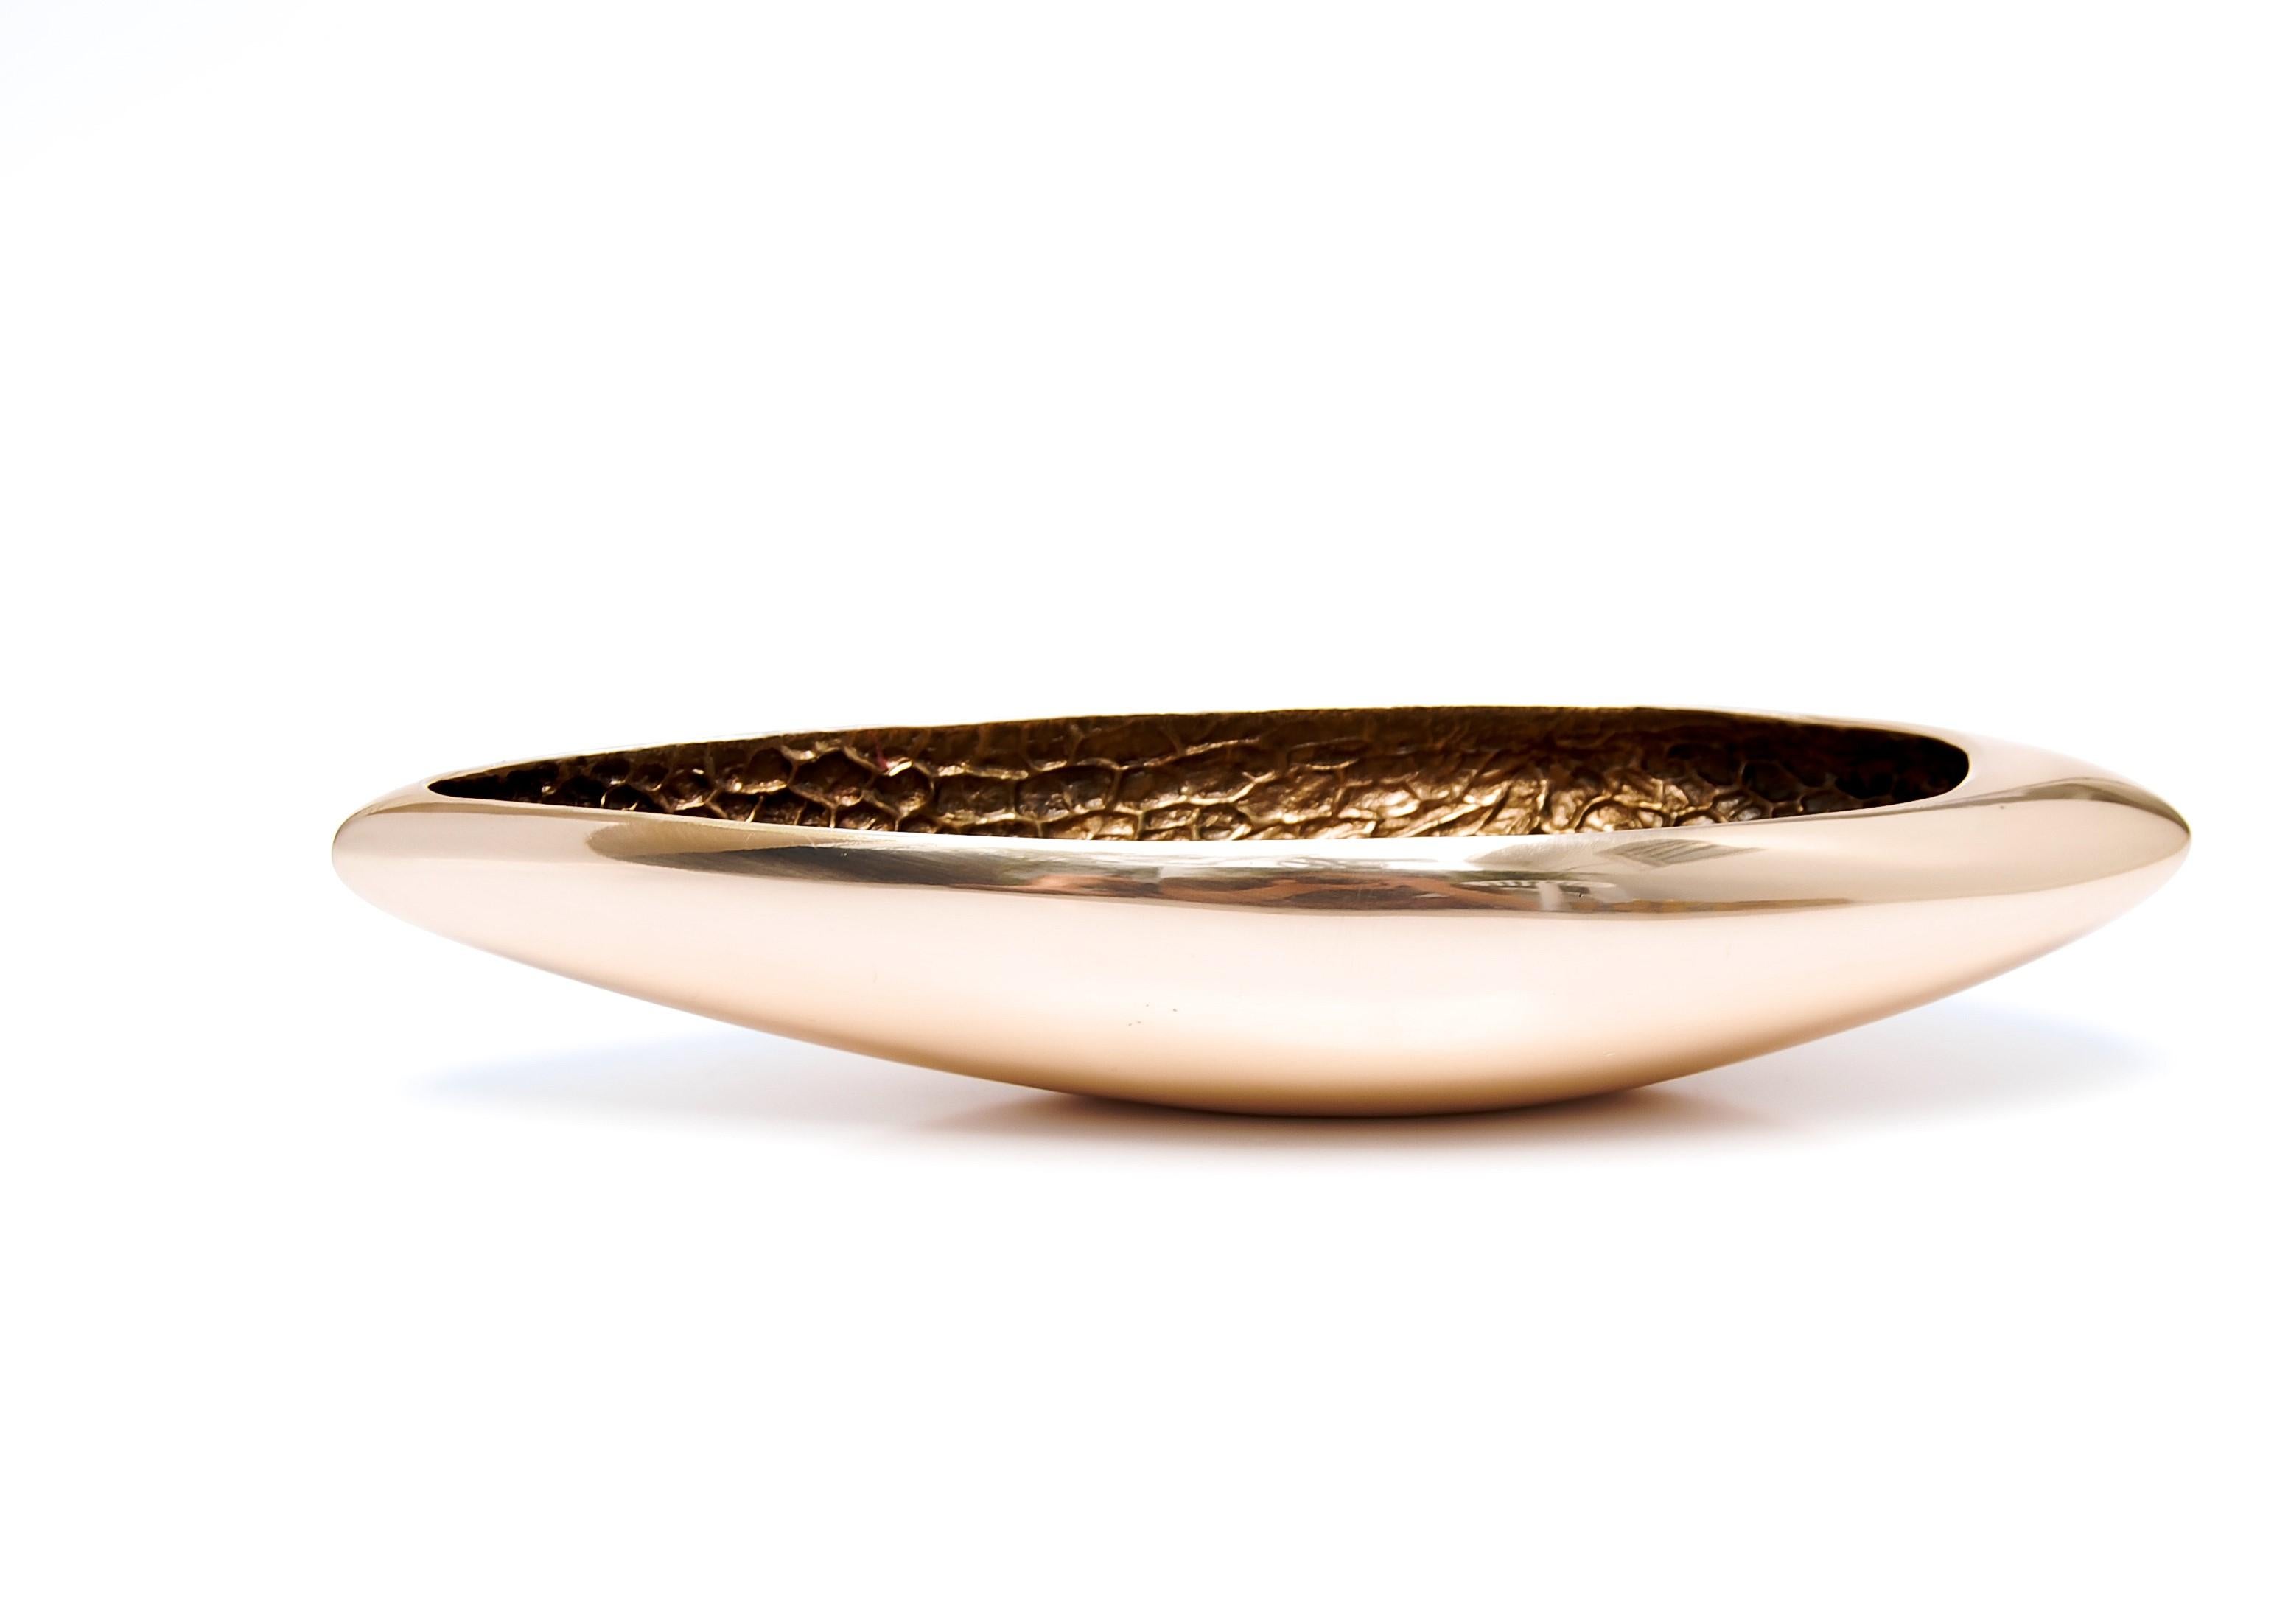 Bowl, centerpiece in polished bronze by FAKASAKA Design
Dimensions: W 36 x D 12 x H 7 cm
Materials: Polished bronze.
  